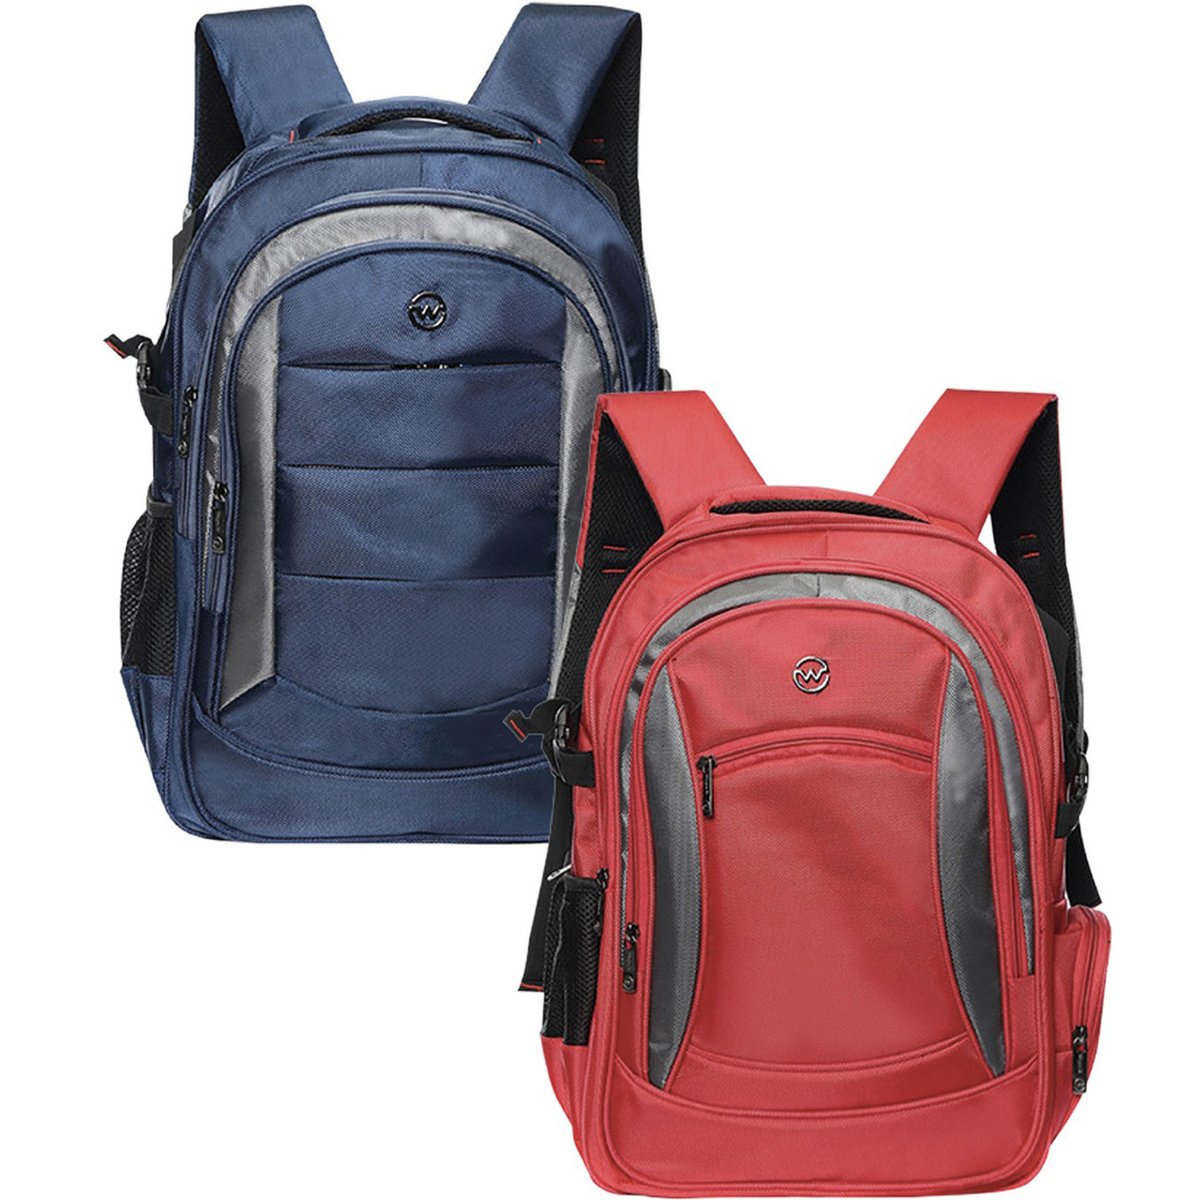 Wagon-R Multi-Backpack 7808 19inch Assorted 1Piece